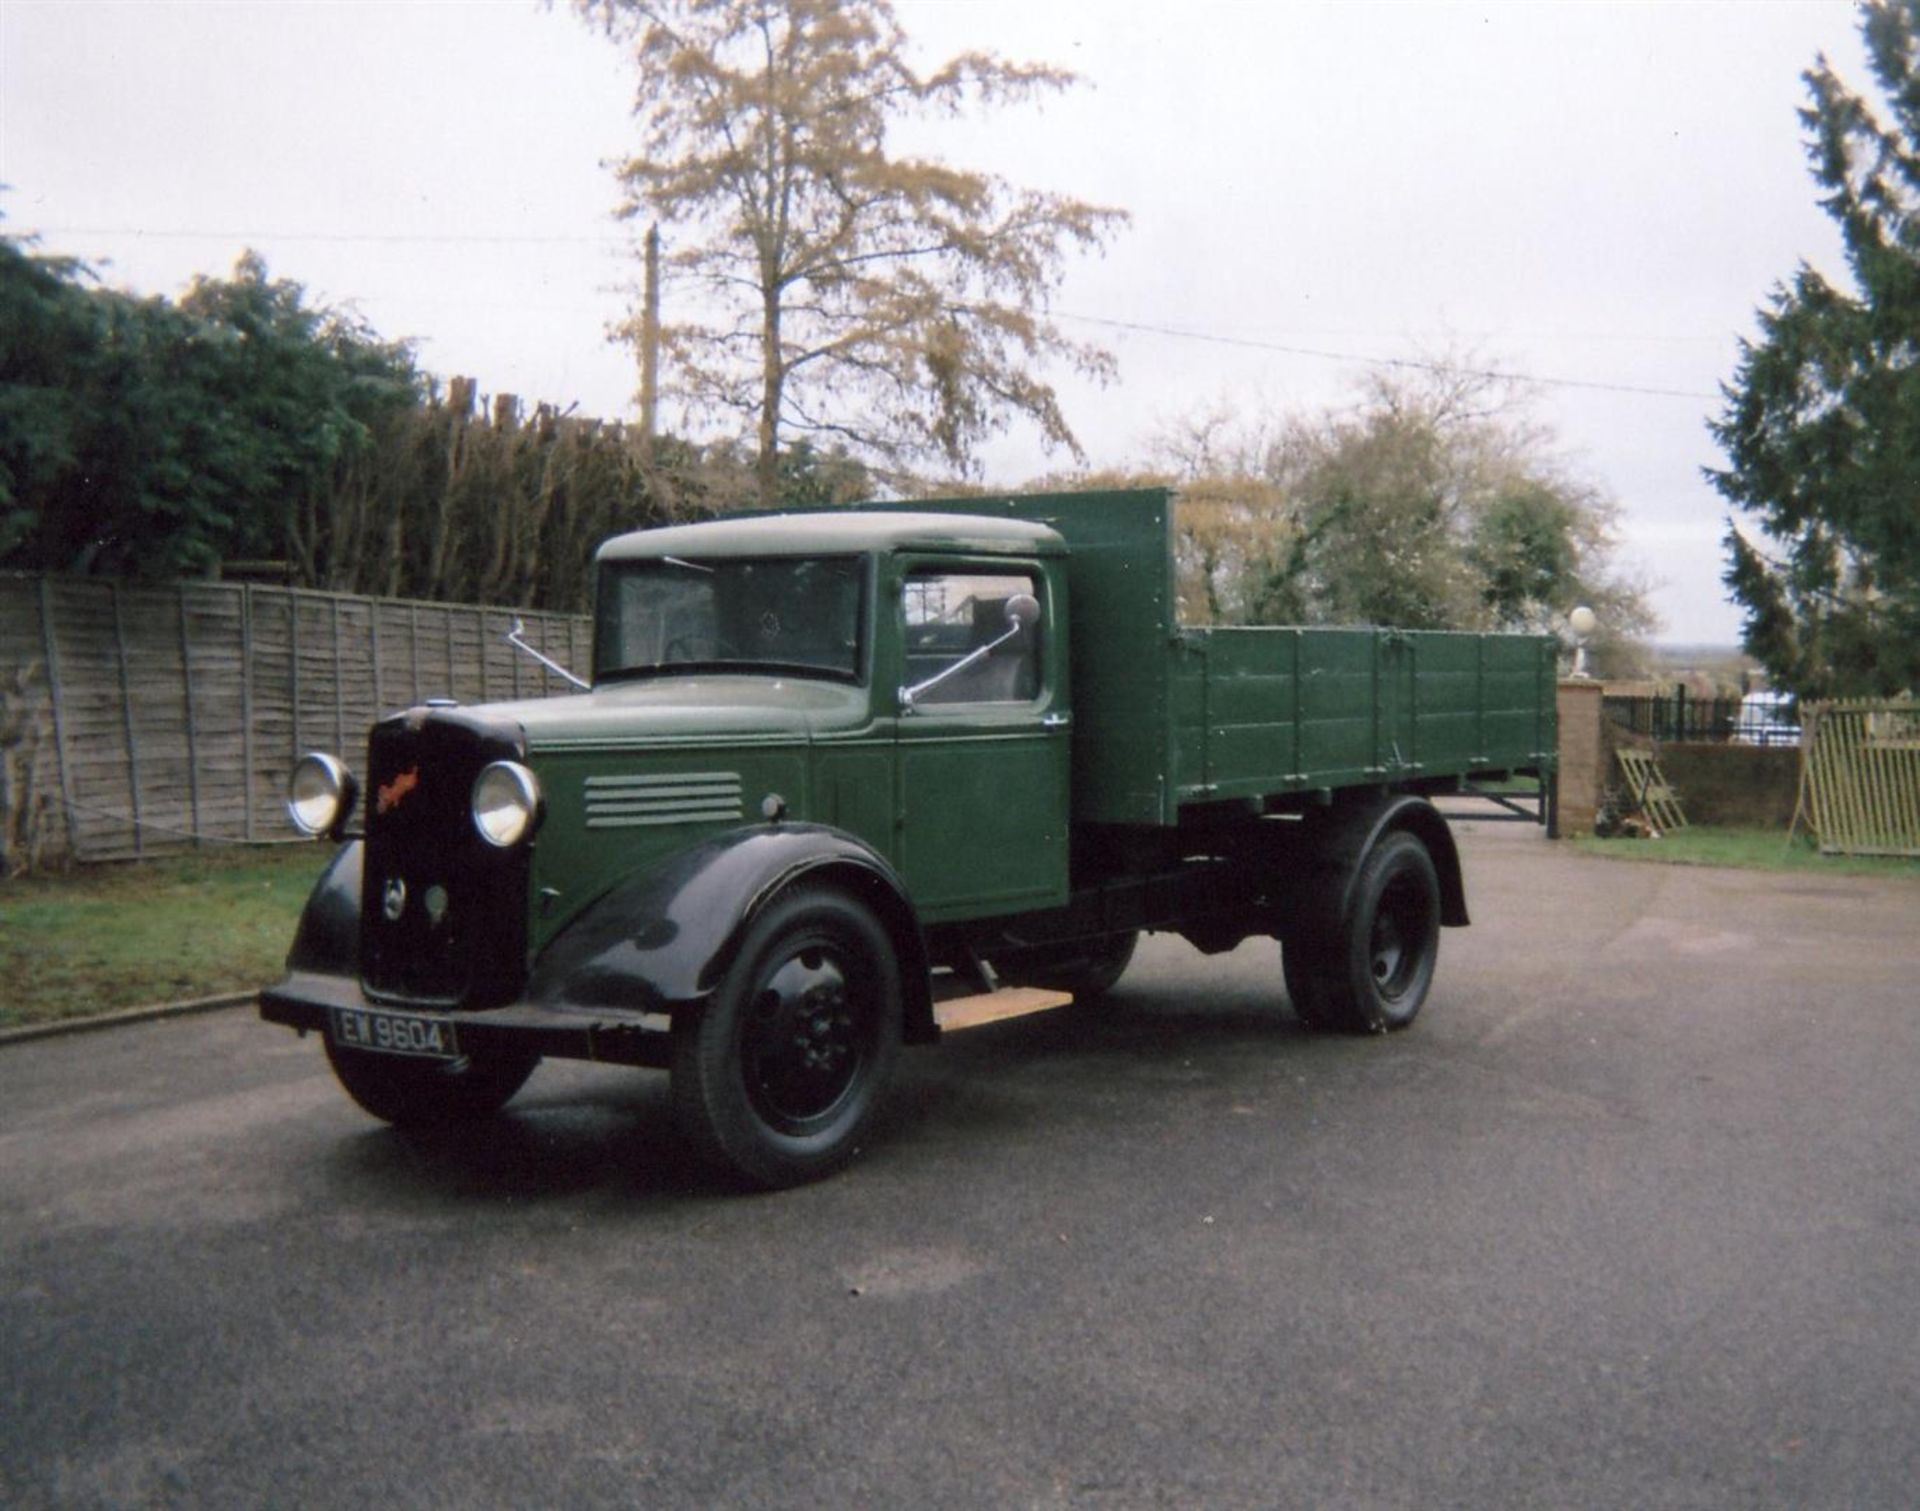 1936 Bedford WL Tipper Reg. No. EW 9604 Chassis No. 0144826 In the current ownership since 1996 this